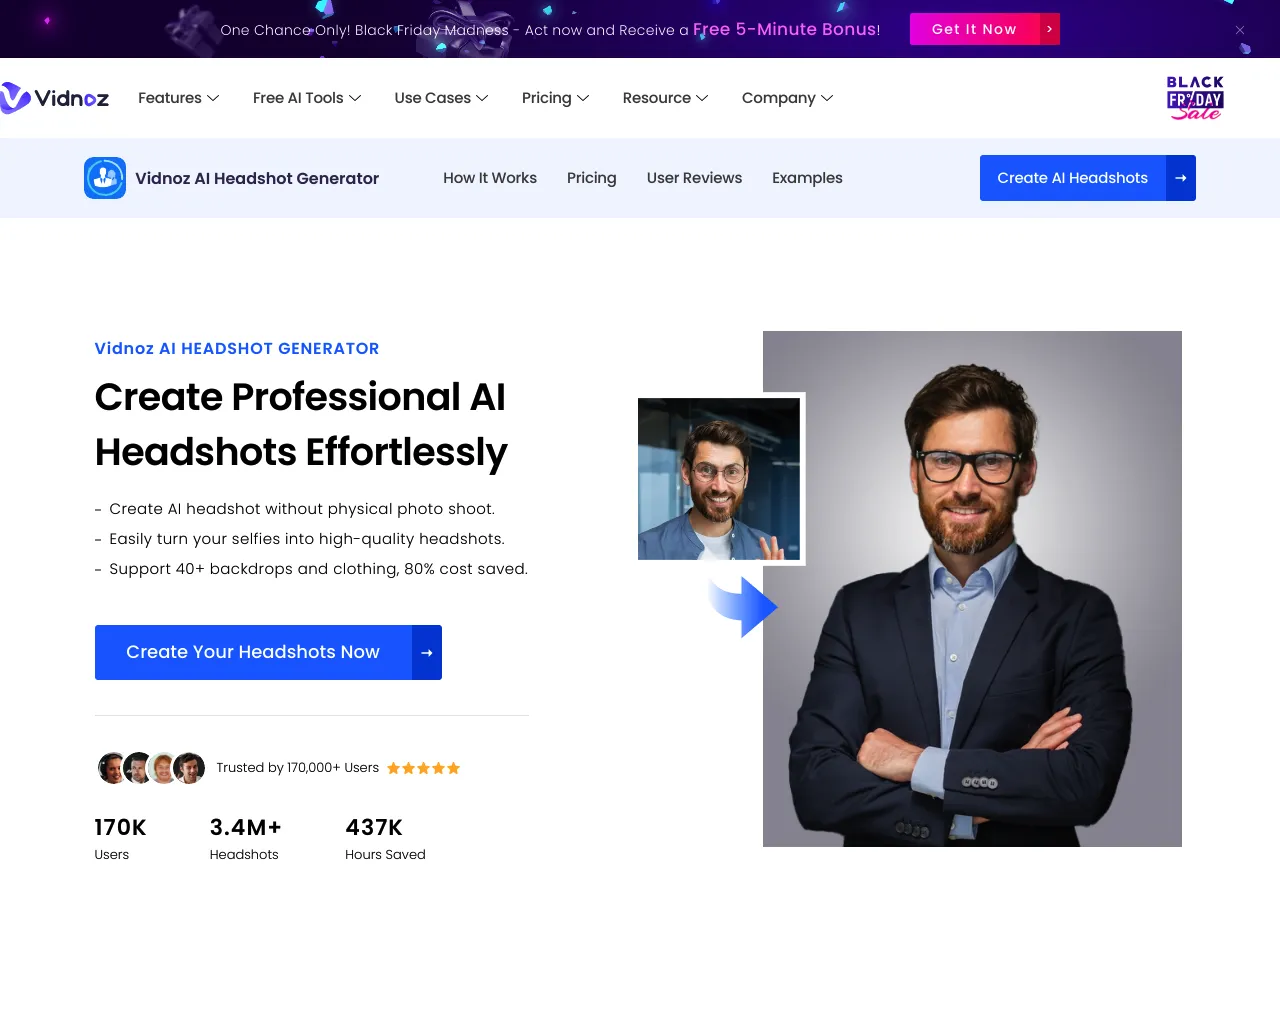 Create Professional AI Headshots Easily and Effortlessly